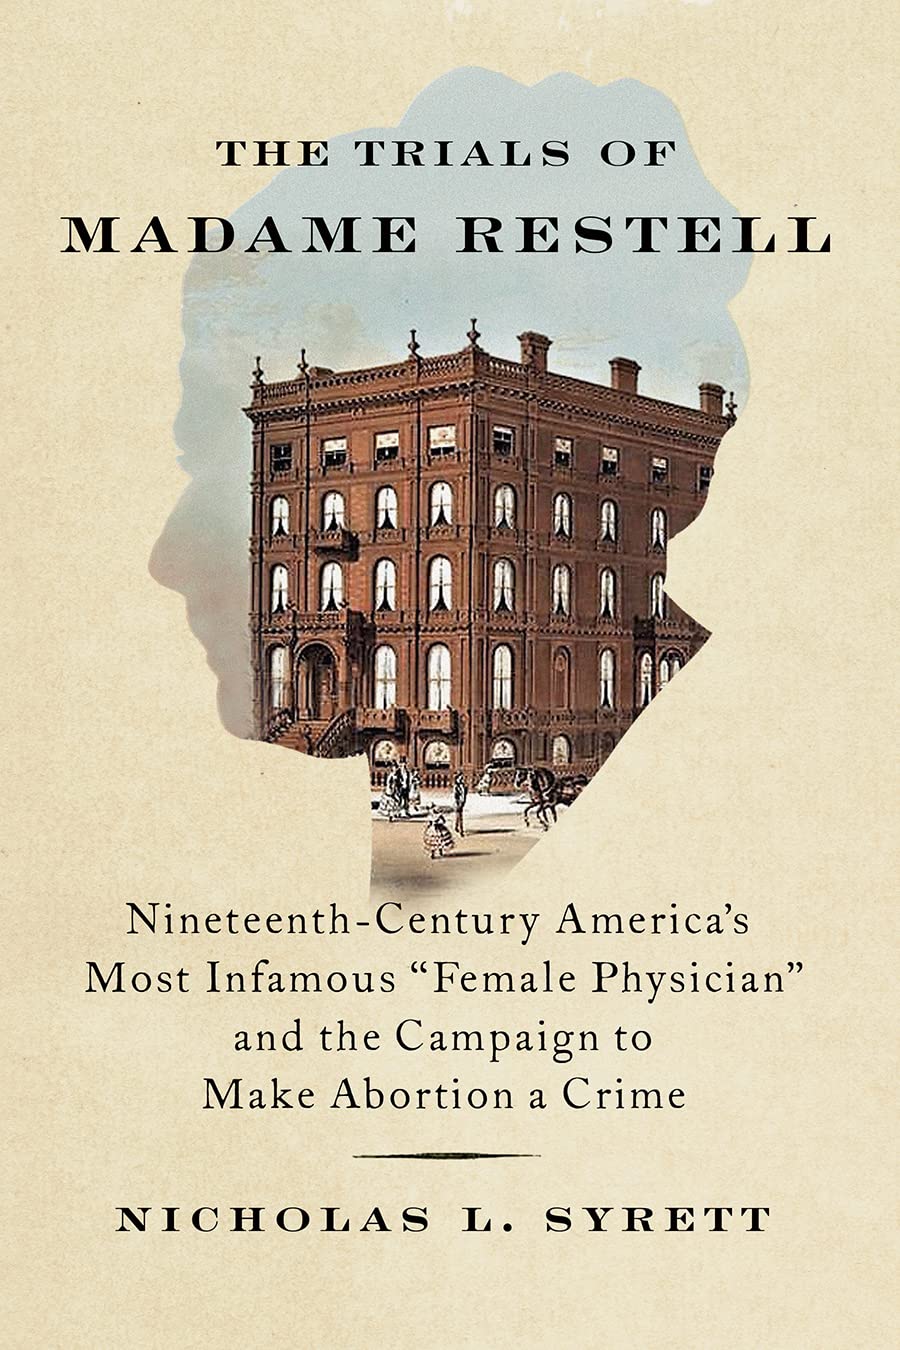 'The Trials of Madame Restell' book cover